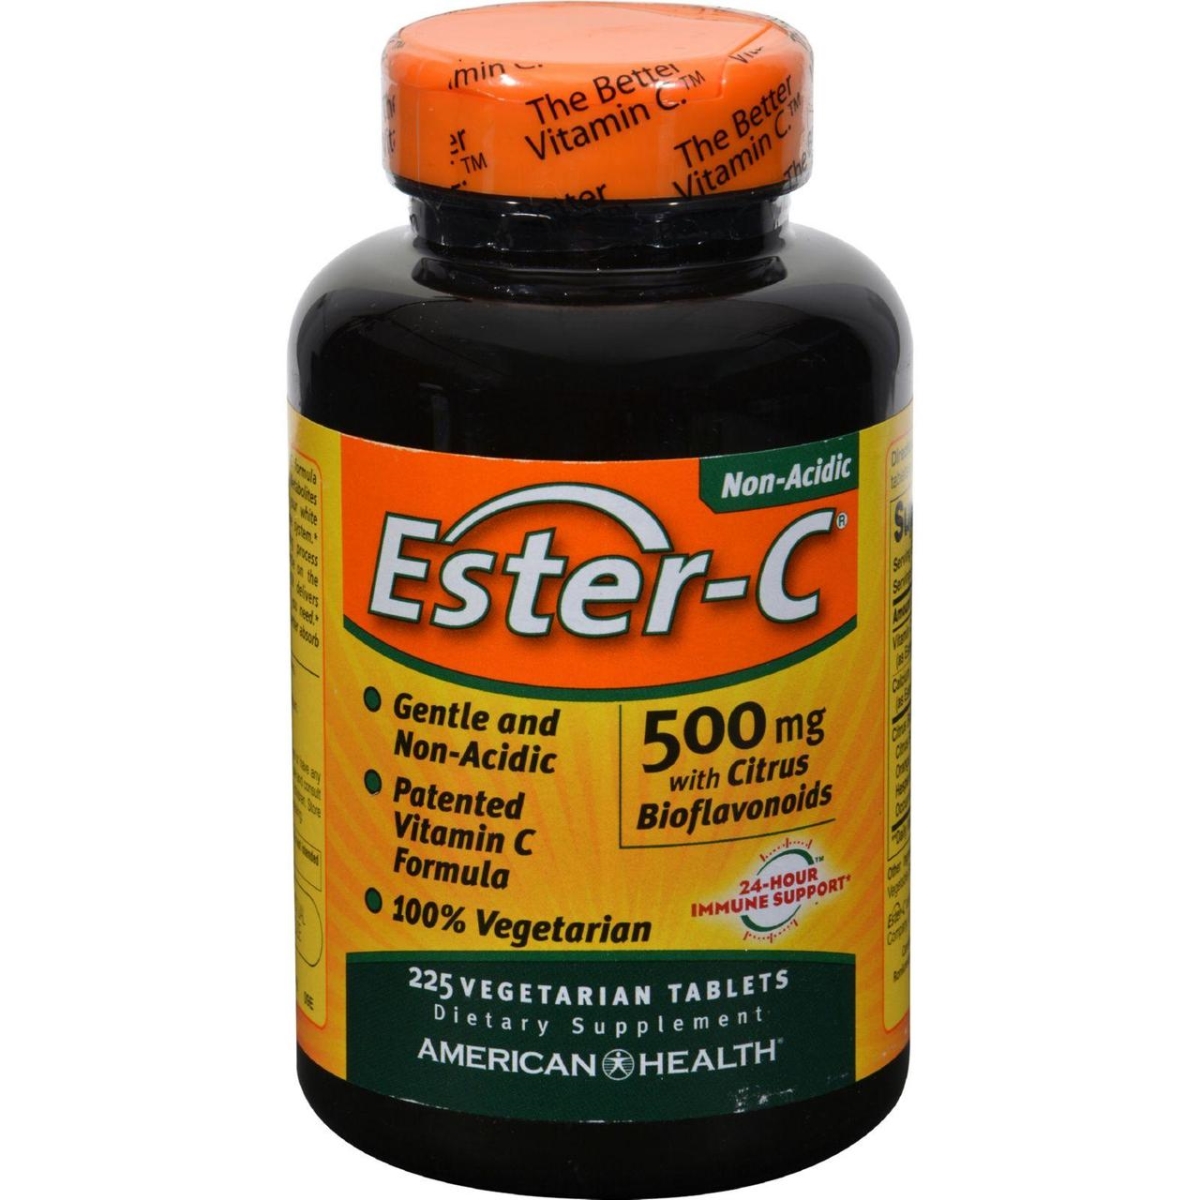 American Health Hg0888297 500 Mg Ester-c With Citrus Bioflavonoids, 225 Vegetarian Tablets